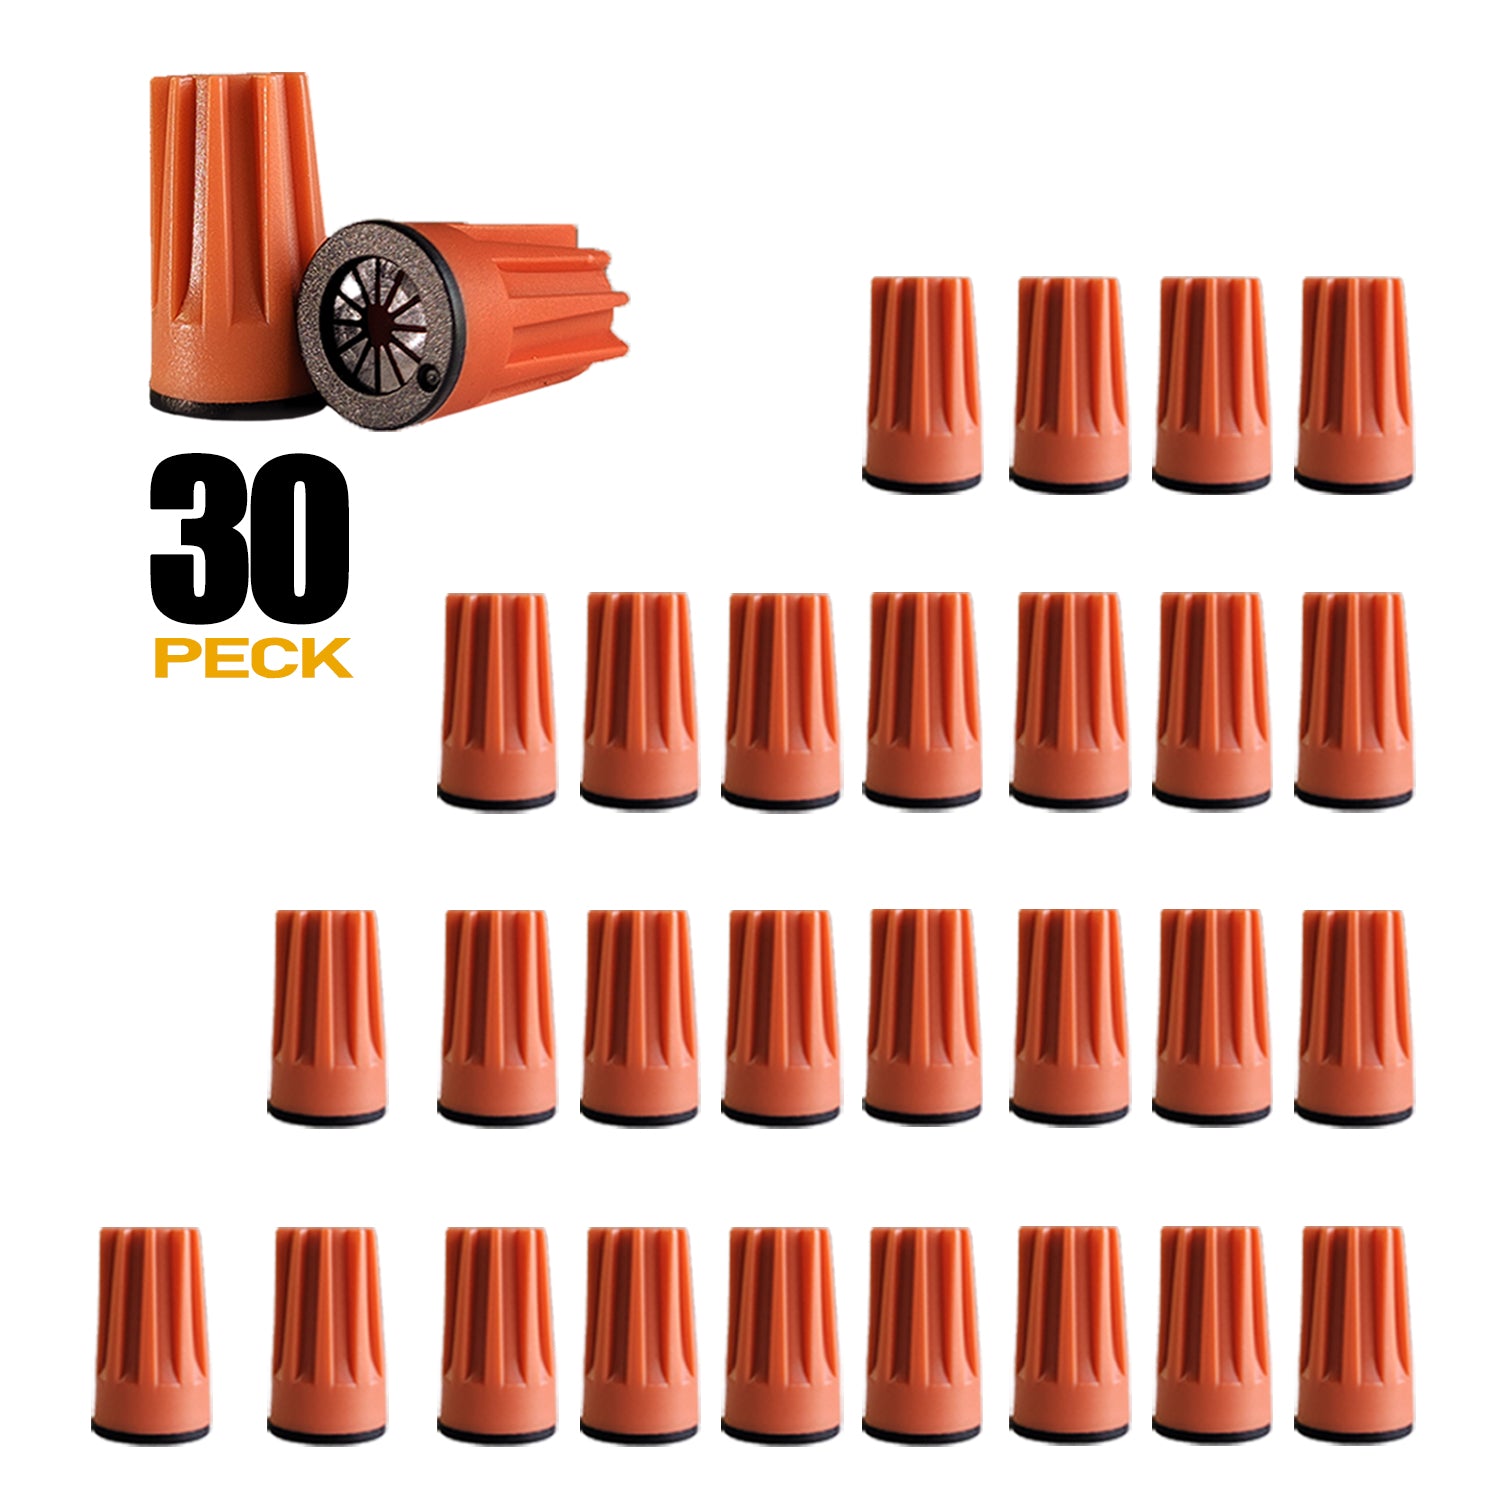 30-pack orange cone-shaped wire tap connectors for landscape lighting, displaying unique ribbed design for easy handling and secure installation